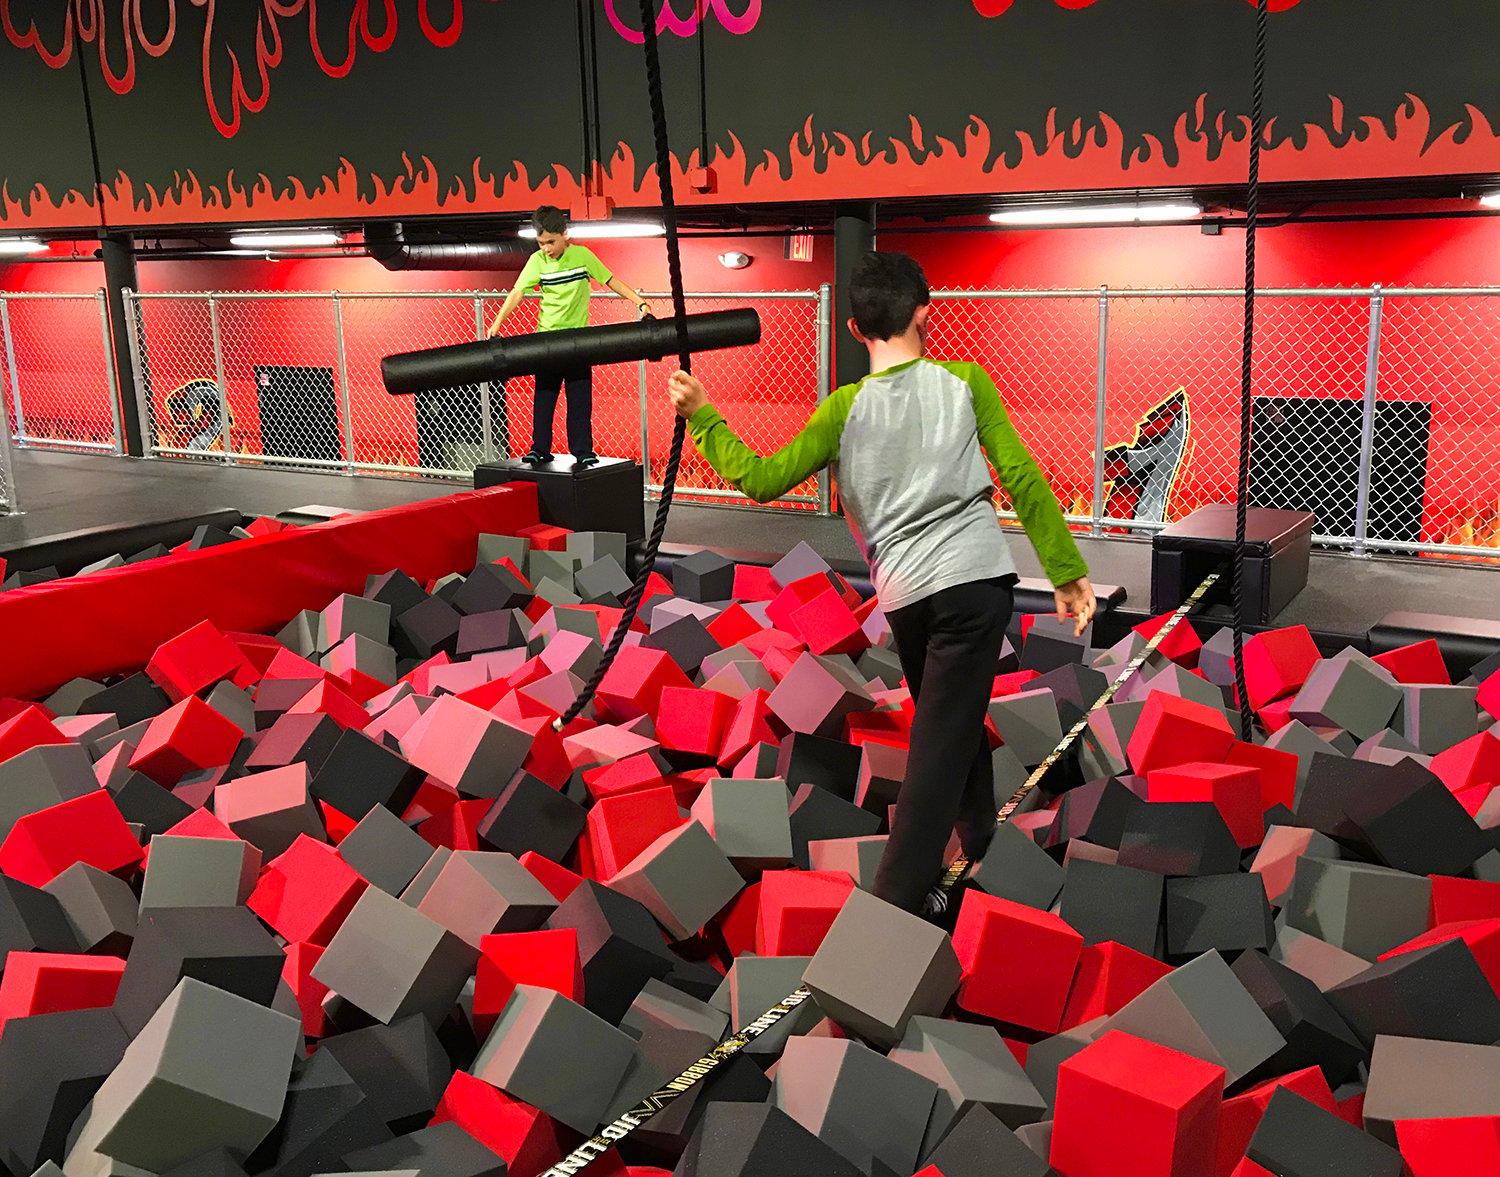 balance beams with foam pit being walked by kid